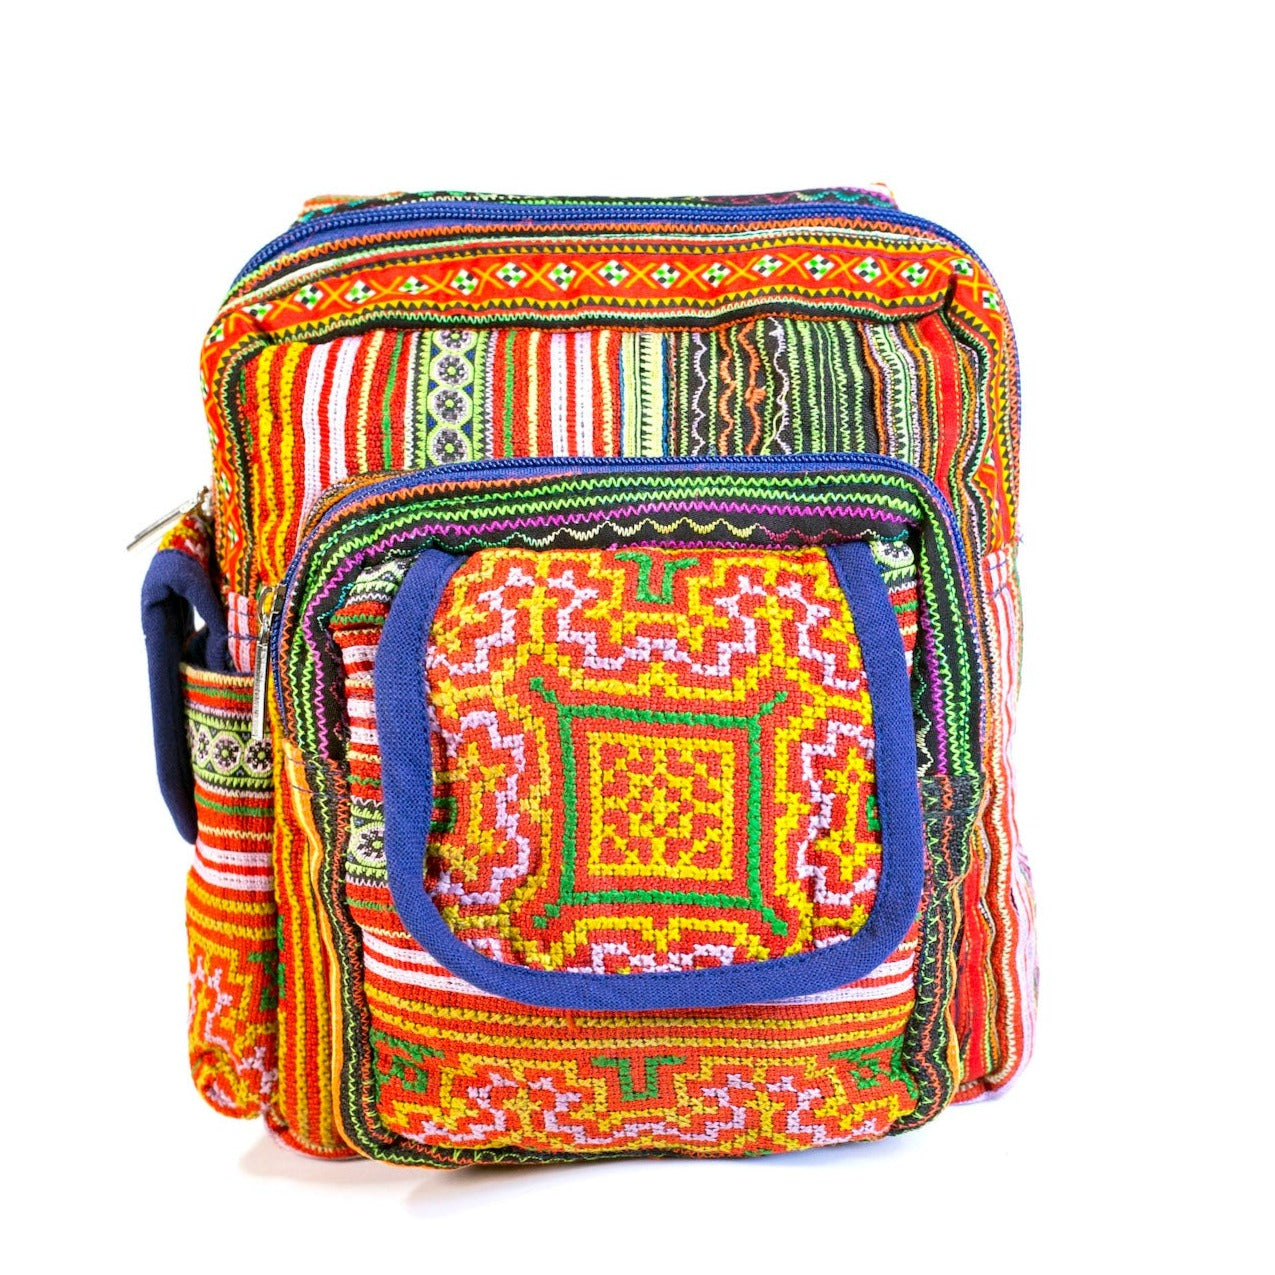 Boho-style linen, embroidery Sling bag, H'mong tribal pattern in ORANGE with blue trim